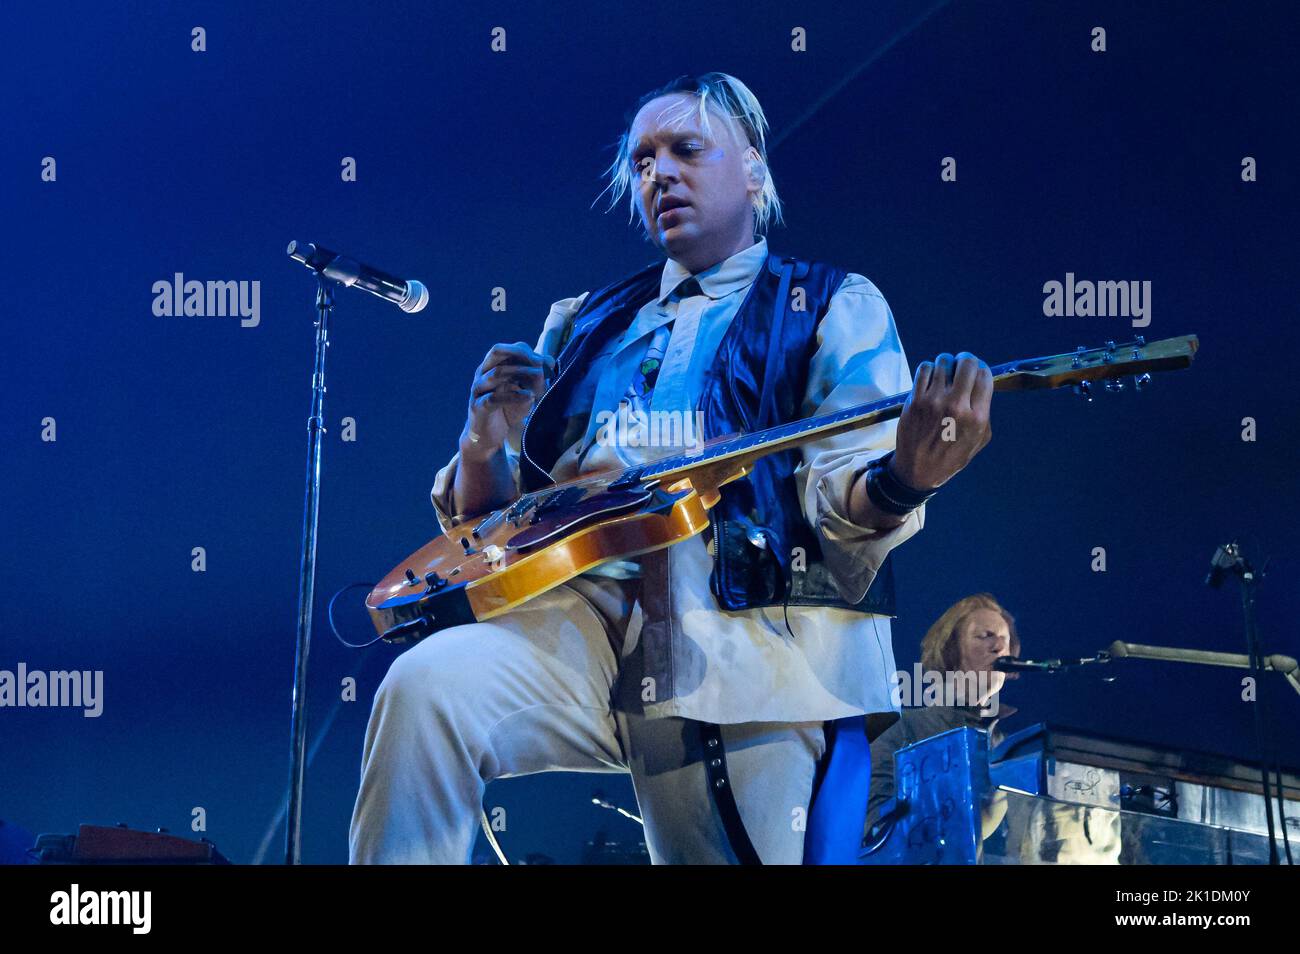 Milan, Italy. 17th Sep, 2022. Milan, Italy - September 17, 2022: Musician and lead singer Win Butler of Arcade Fire performs on stage during the ‘The We Tour' at Mediolanum Forum in Assago, Italy (Photo by Piero Cruciatti/Sipa USA) Credit: Sipa USA/Alamy Live News Stock Photo